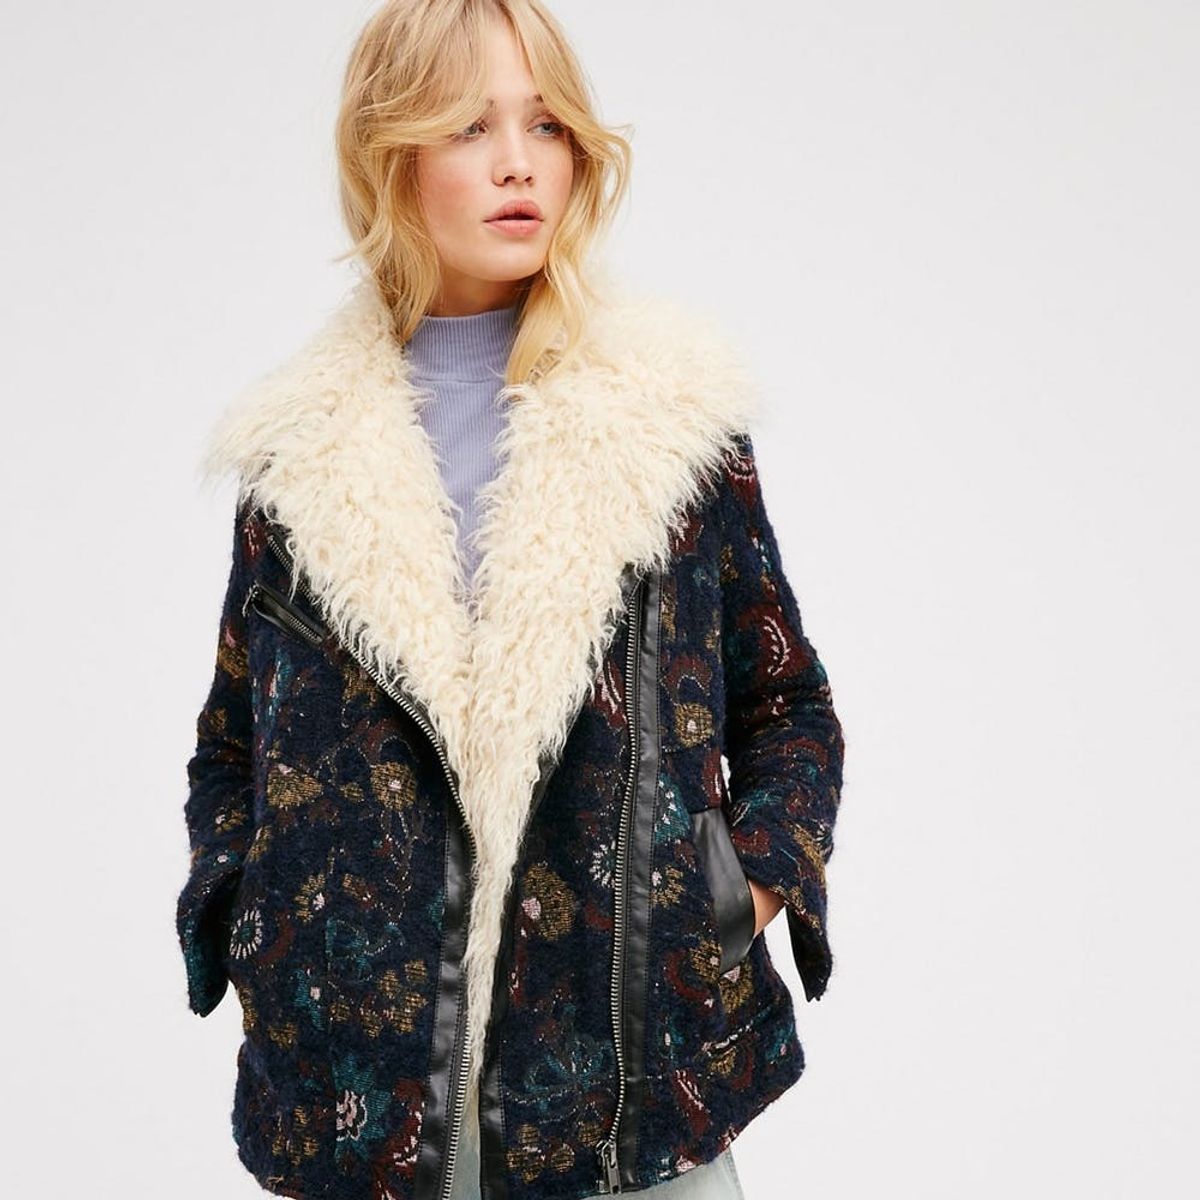 The Statement Coat You Need for Fall According to Your Zodiac Sign